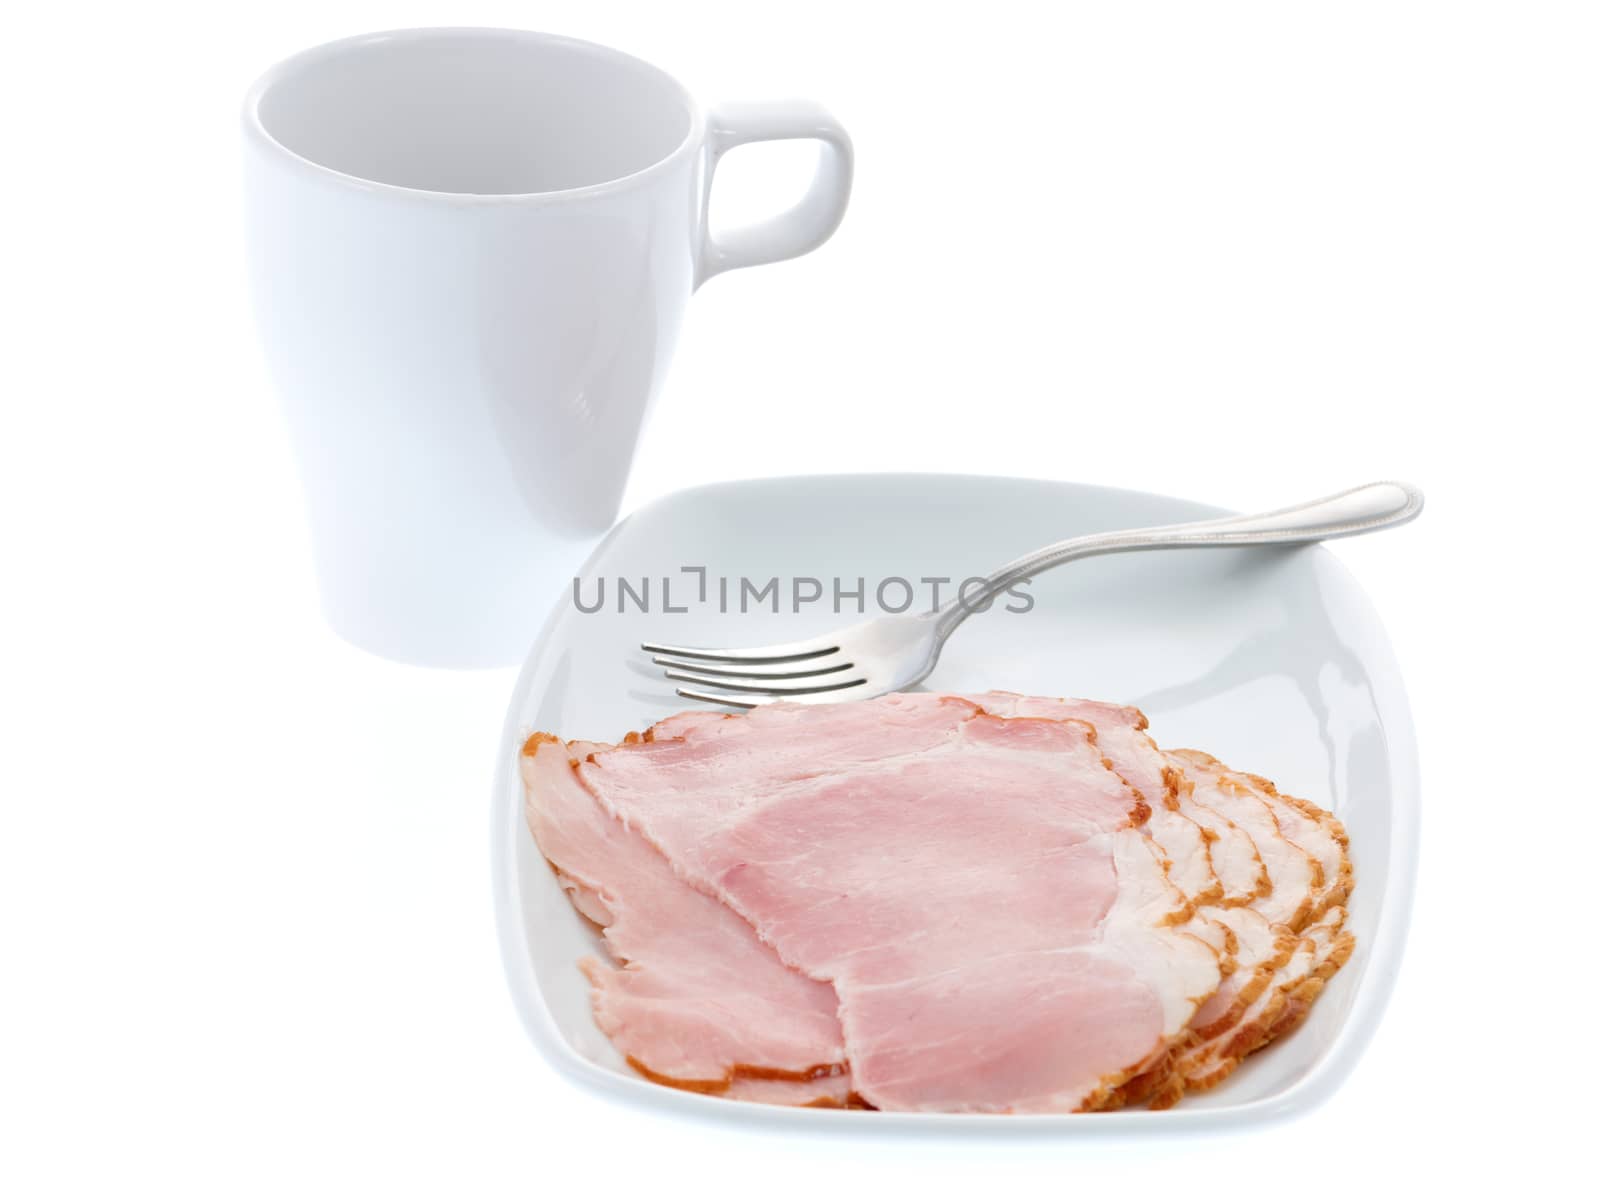 Ham slices on a plate